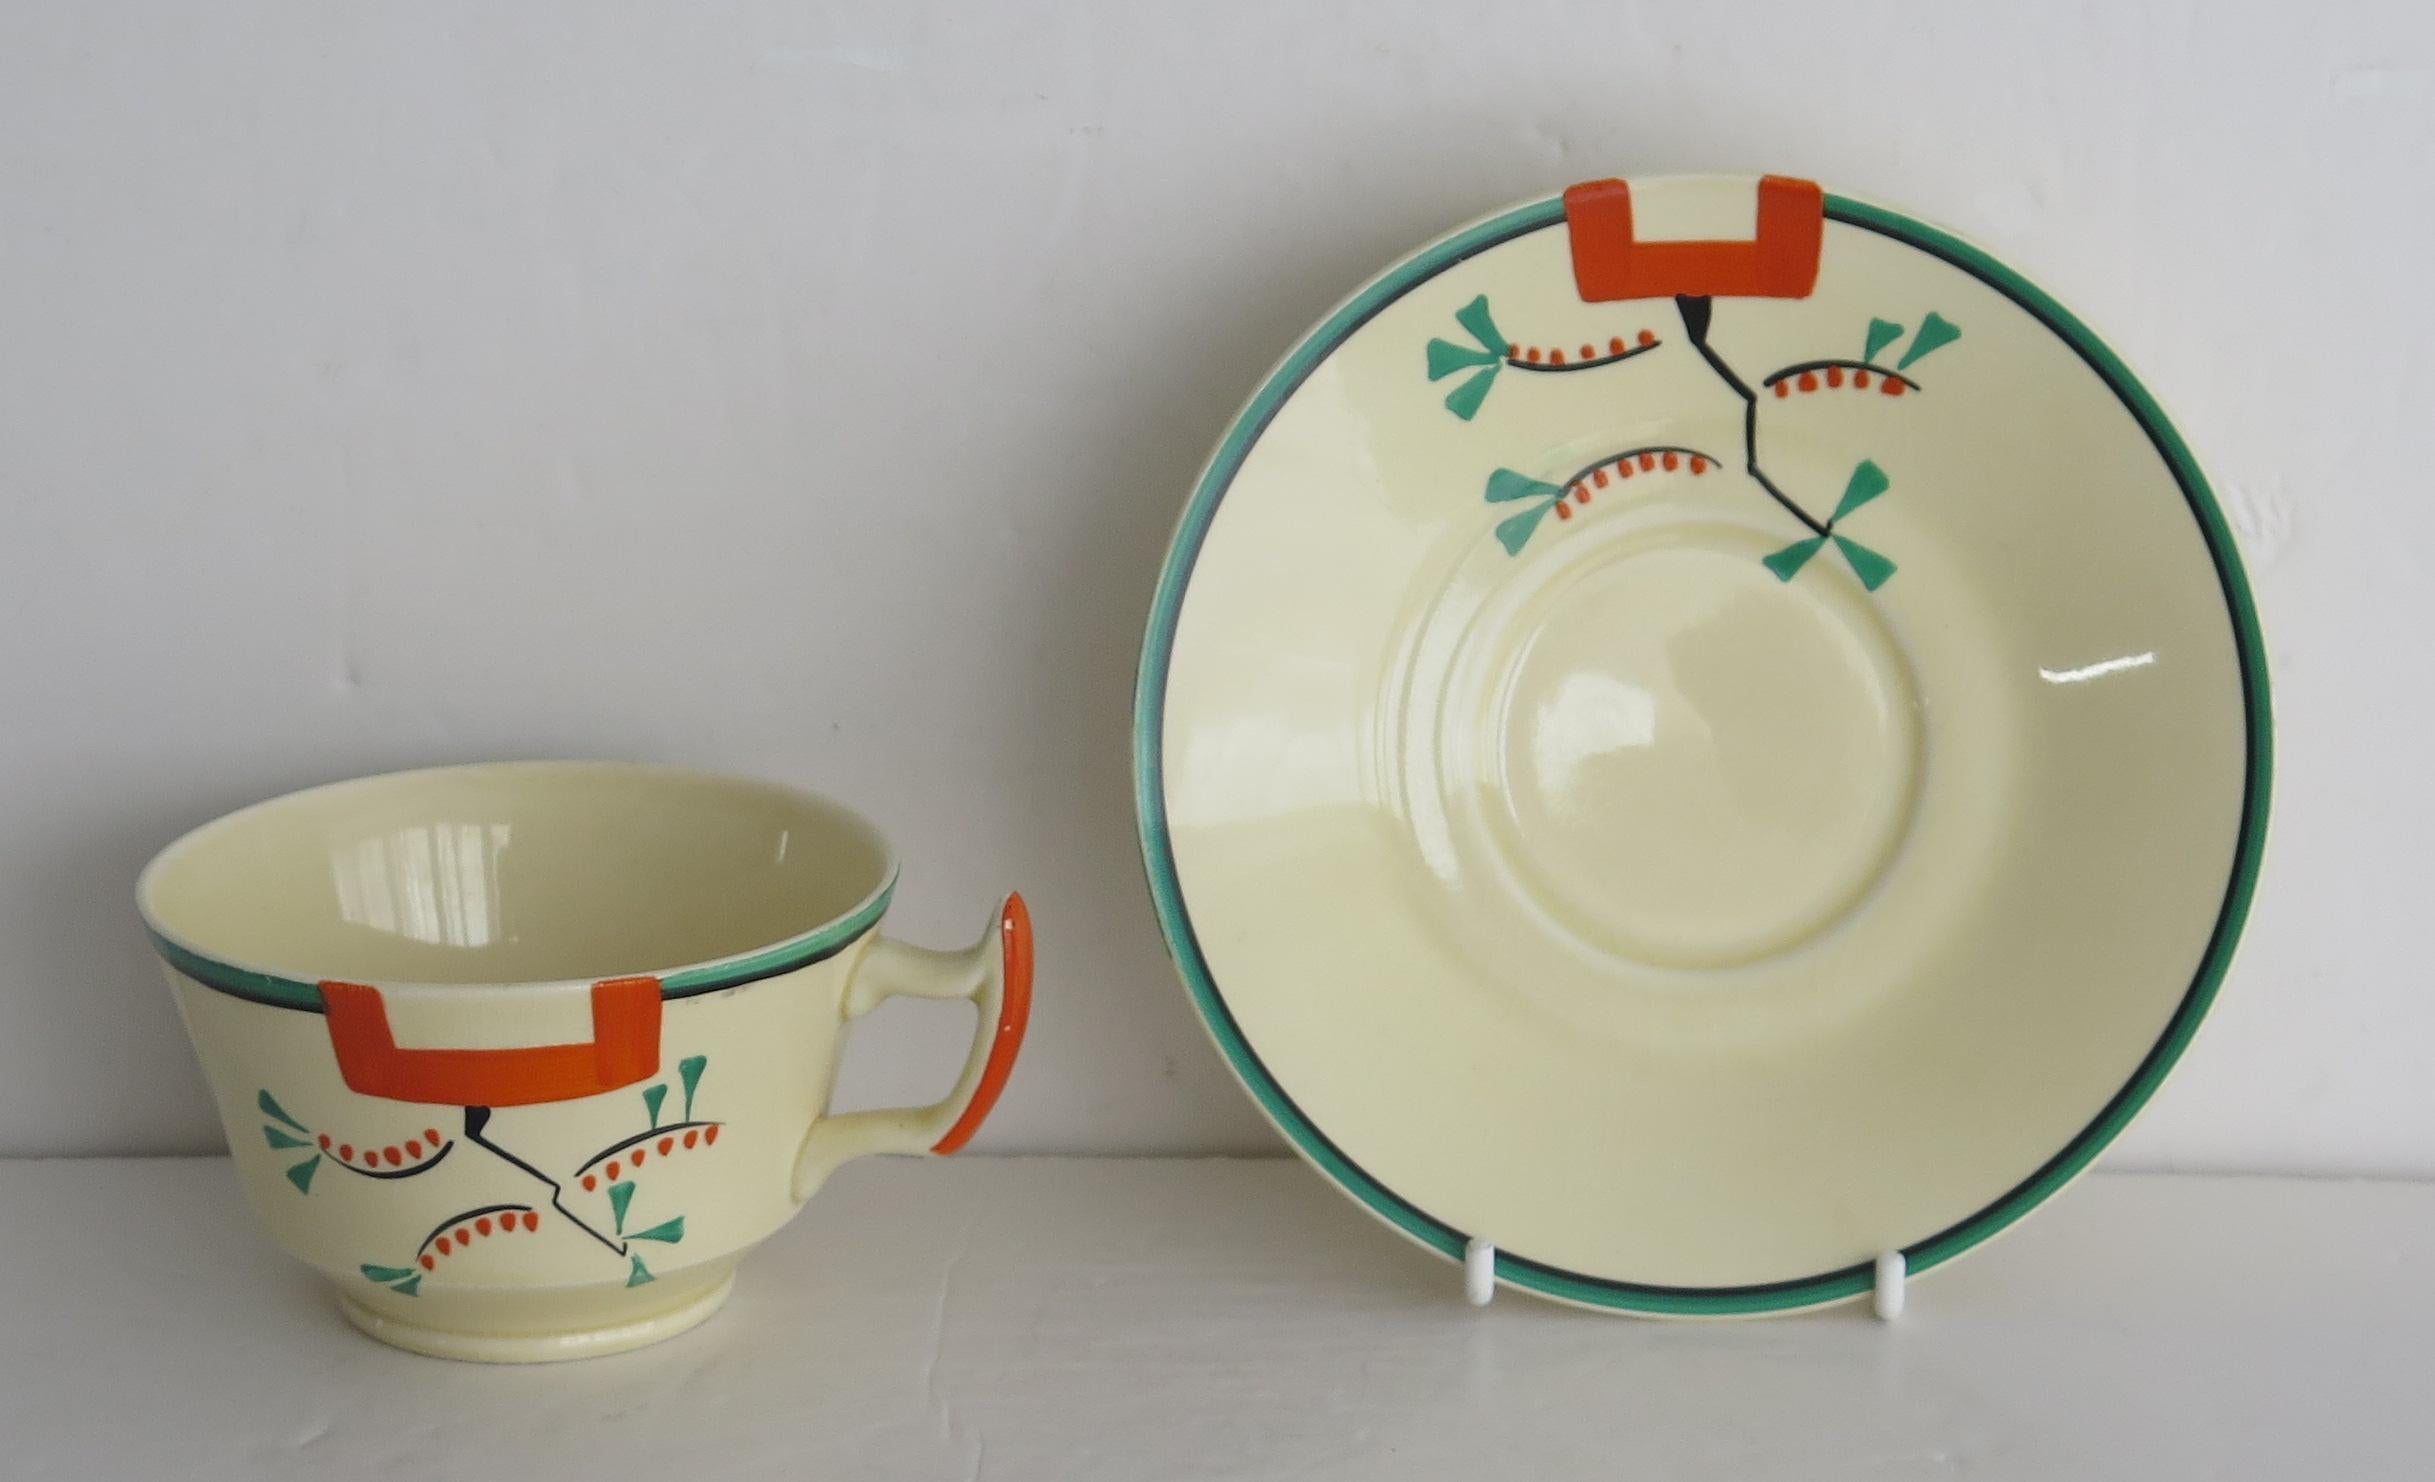 This is a cup & saucer duo in the hand painted 